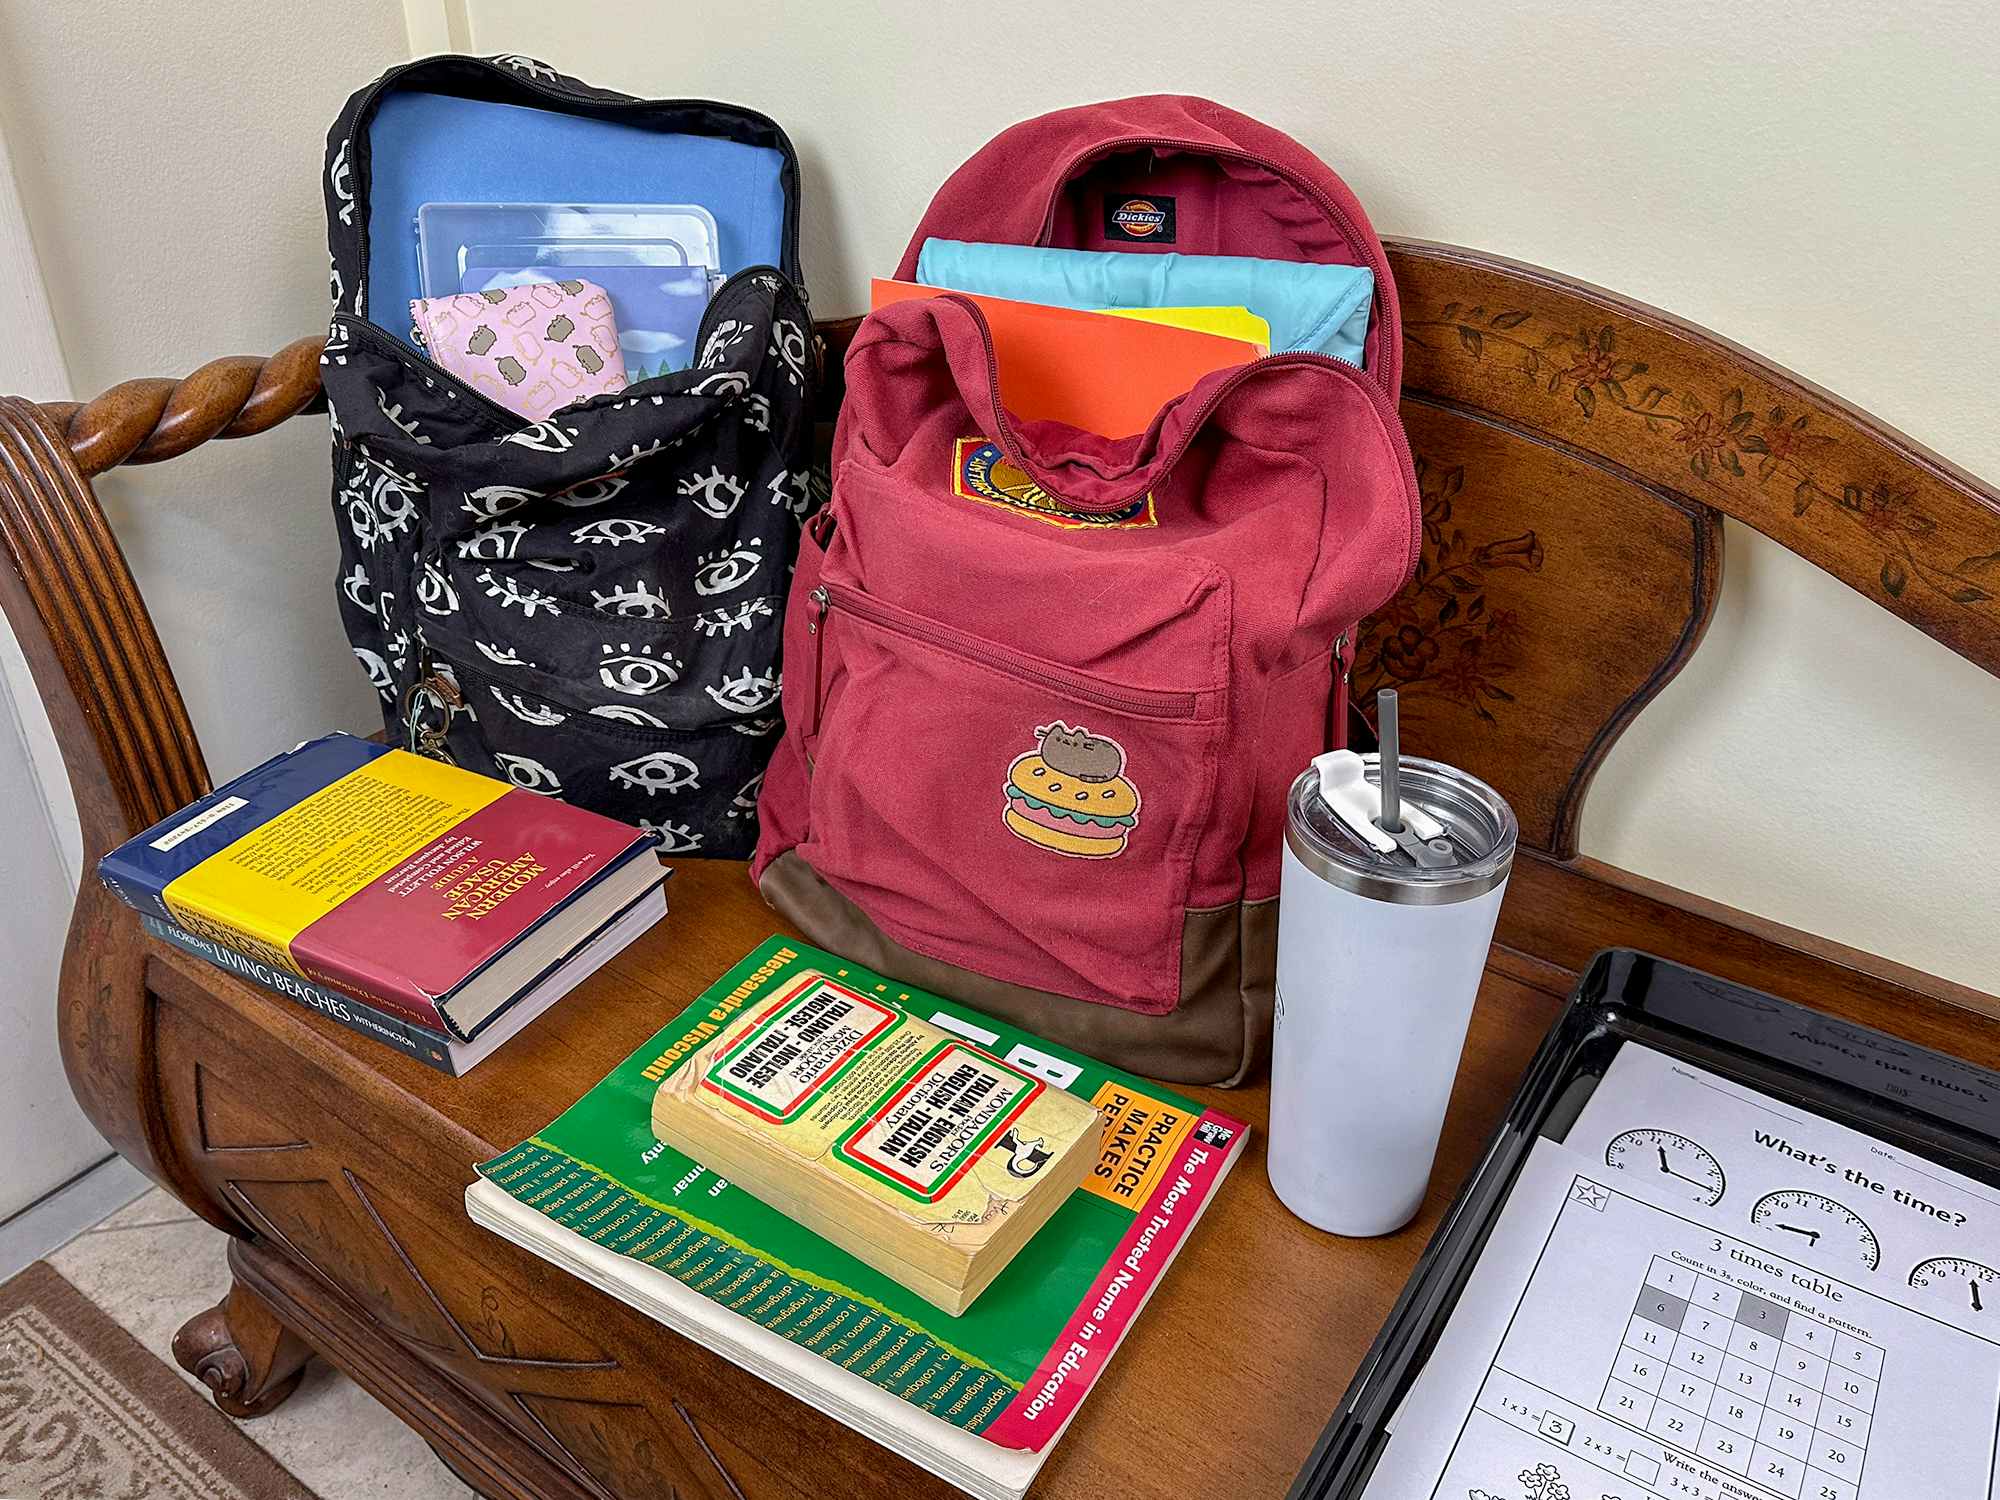 Backpacks, books, a water bottle, and a tray for assignments set up on a wooden bench by the door